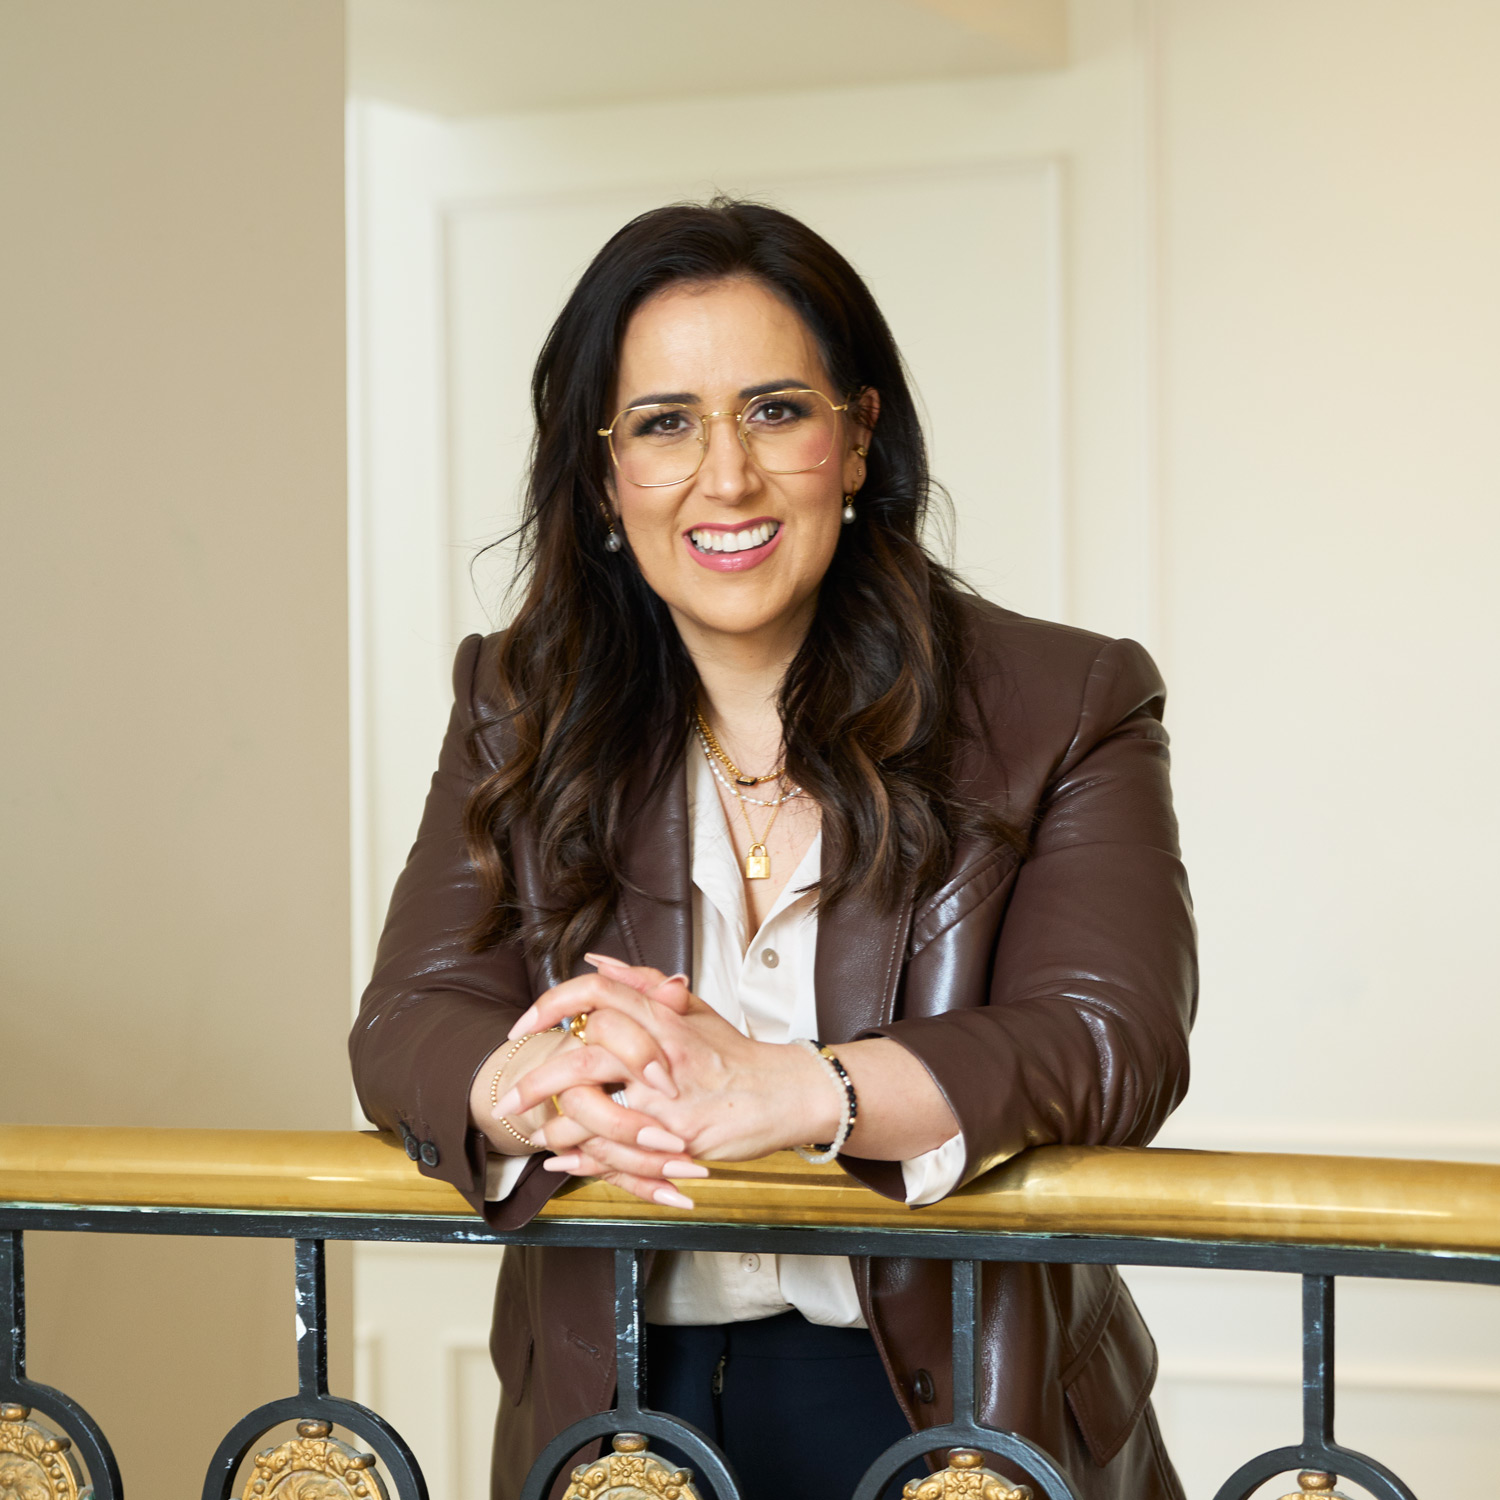 Carinne Chambers-Saini, co-founder of Diva, posing in a brown jacket